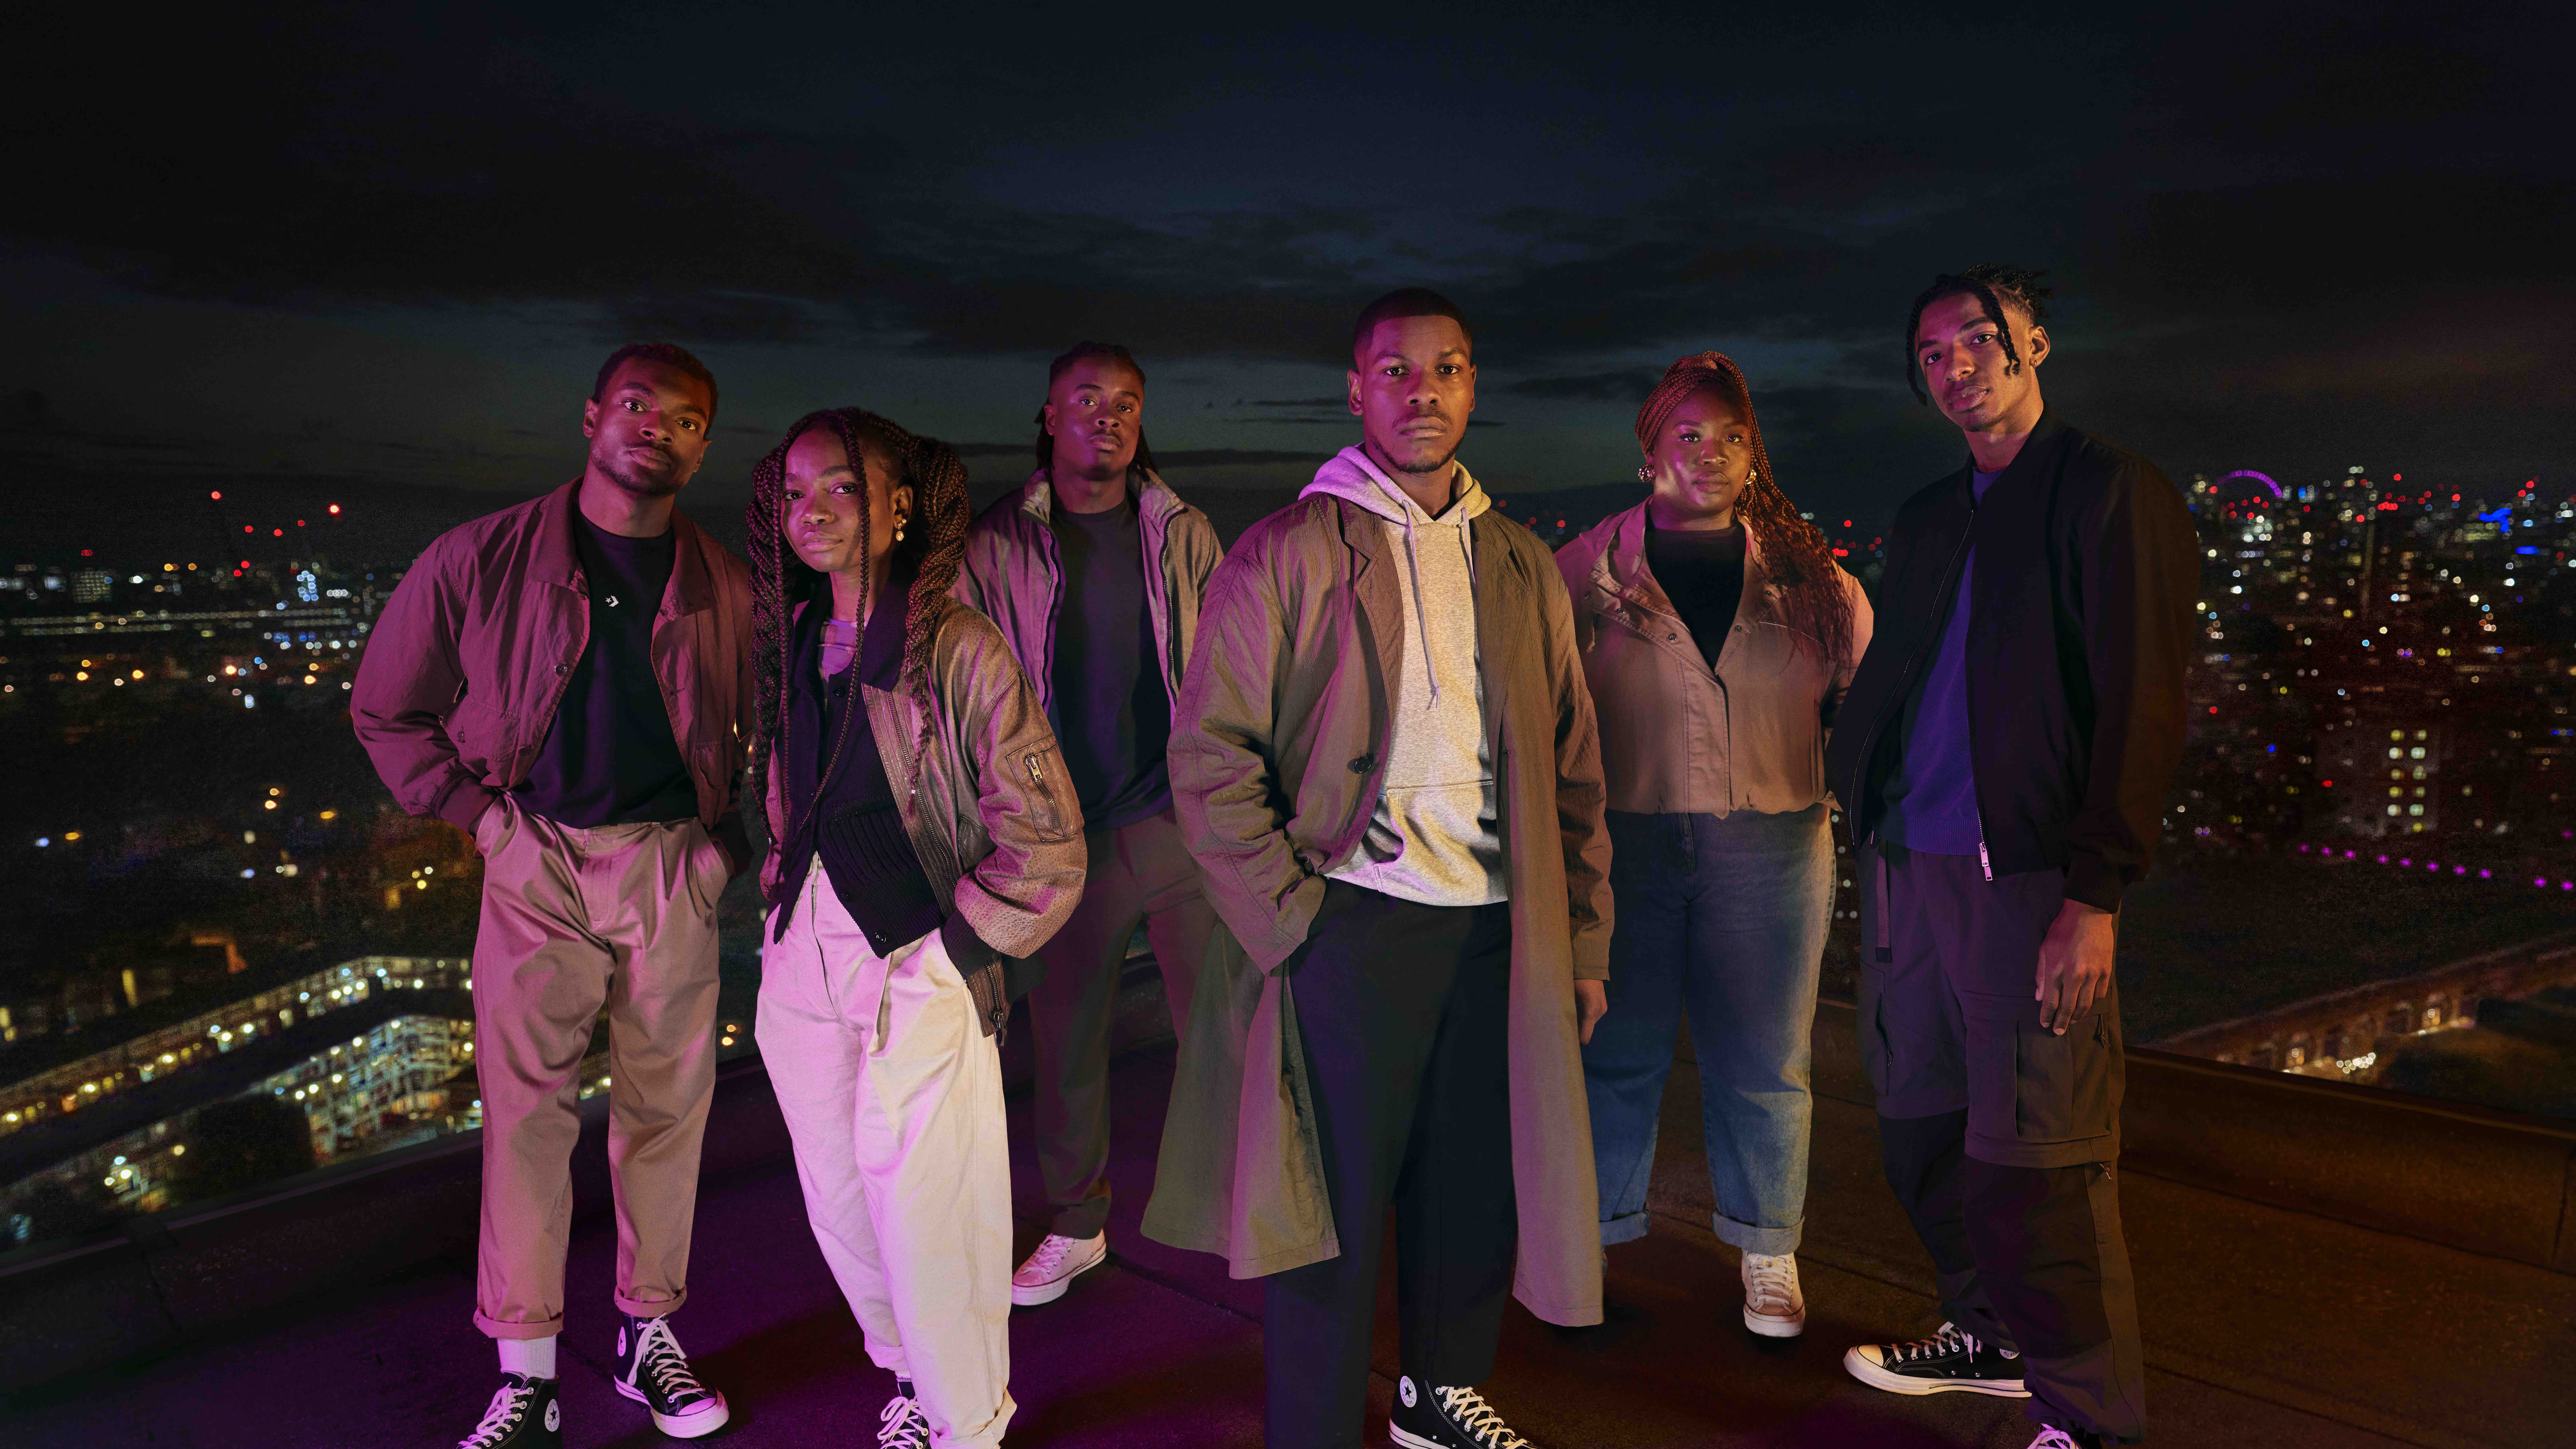 Meet the All Stars Involved in Converse’s Create Next Film Project with John Boyega